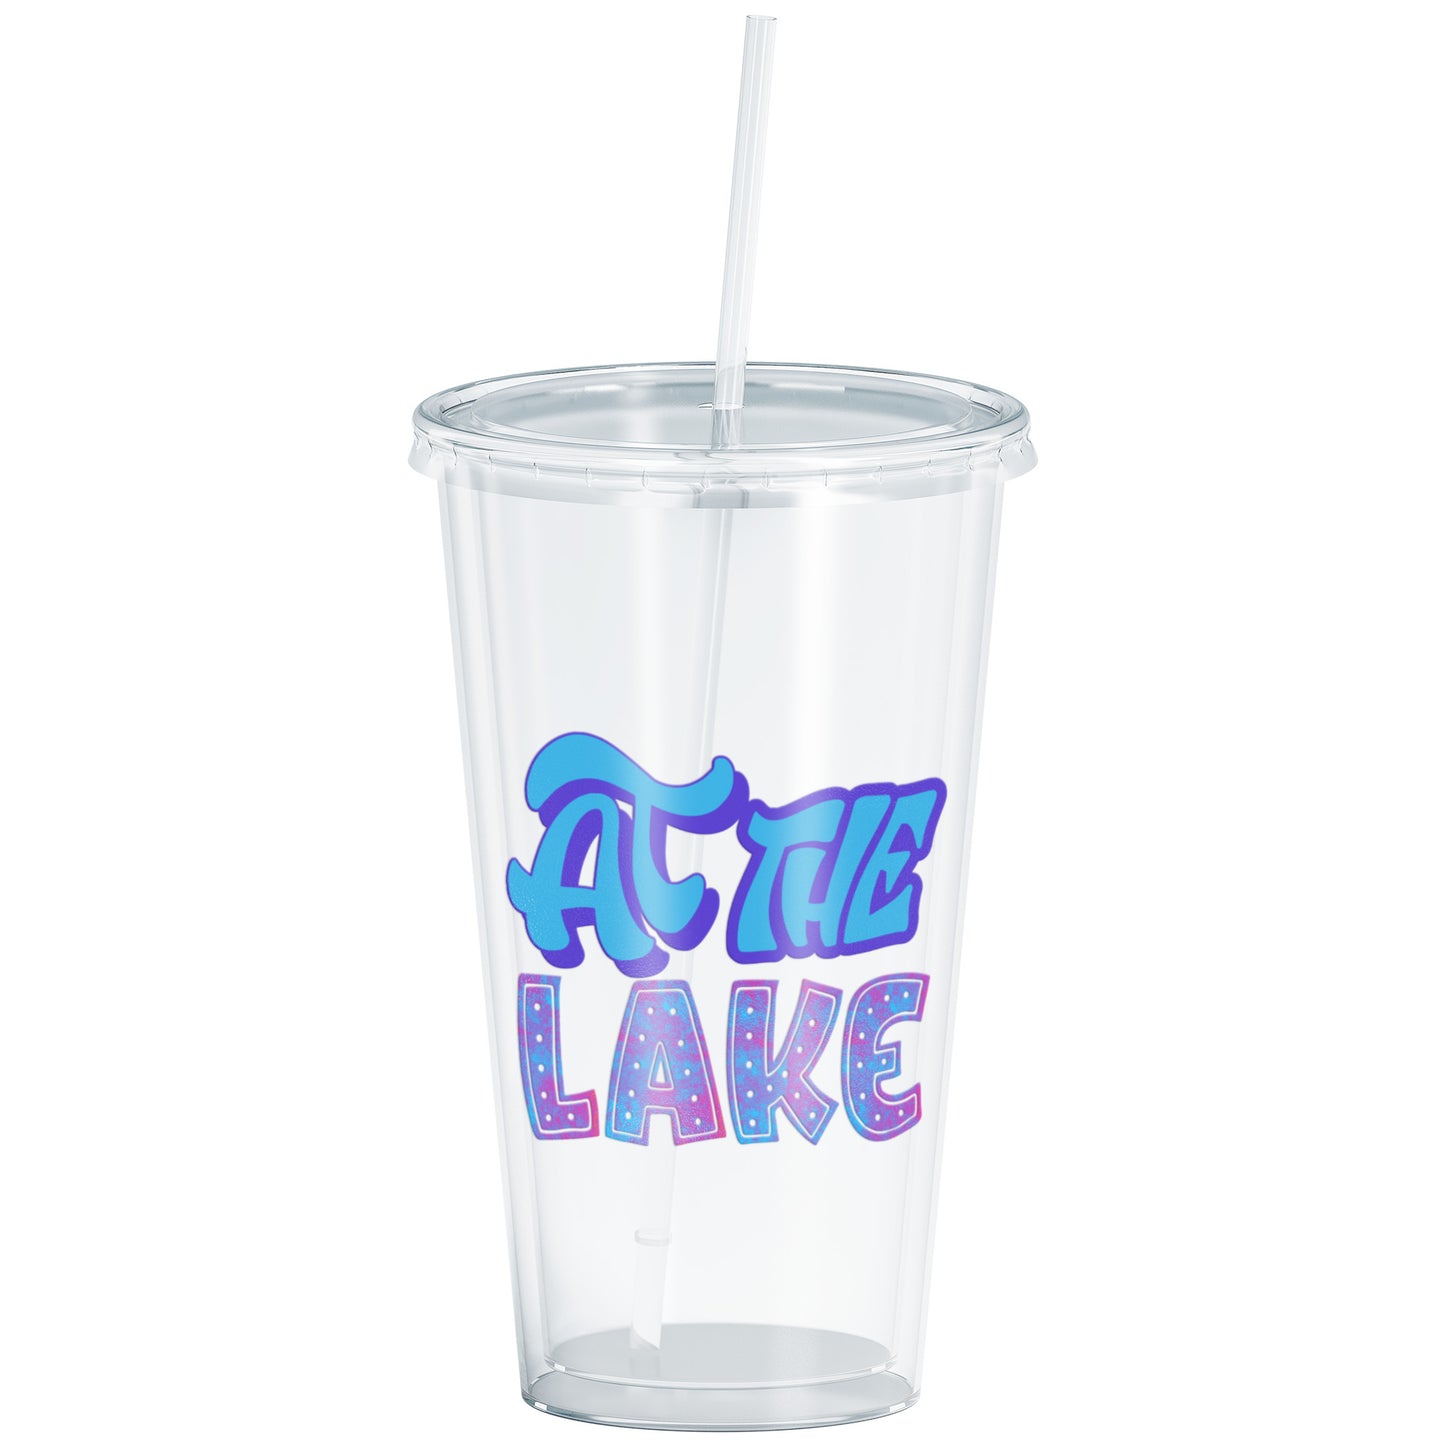 At The Lake Acrylic Cup Blue Design